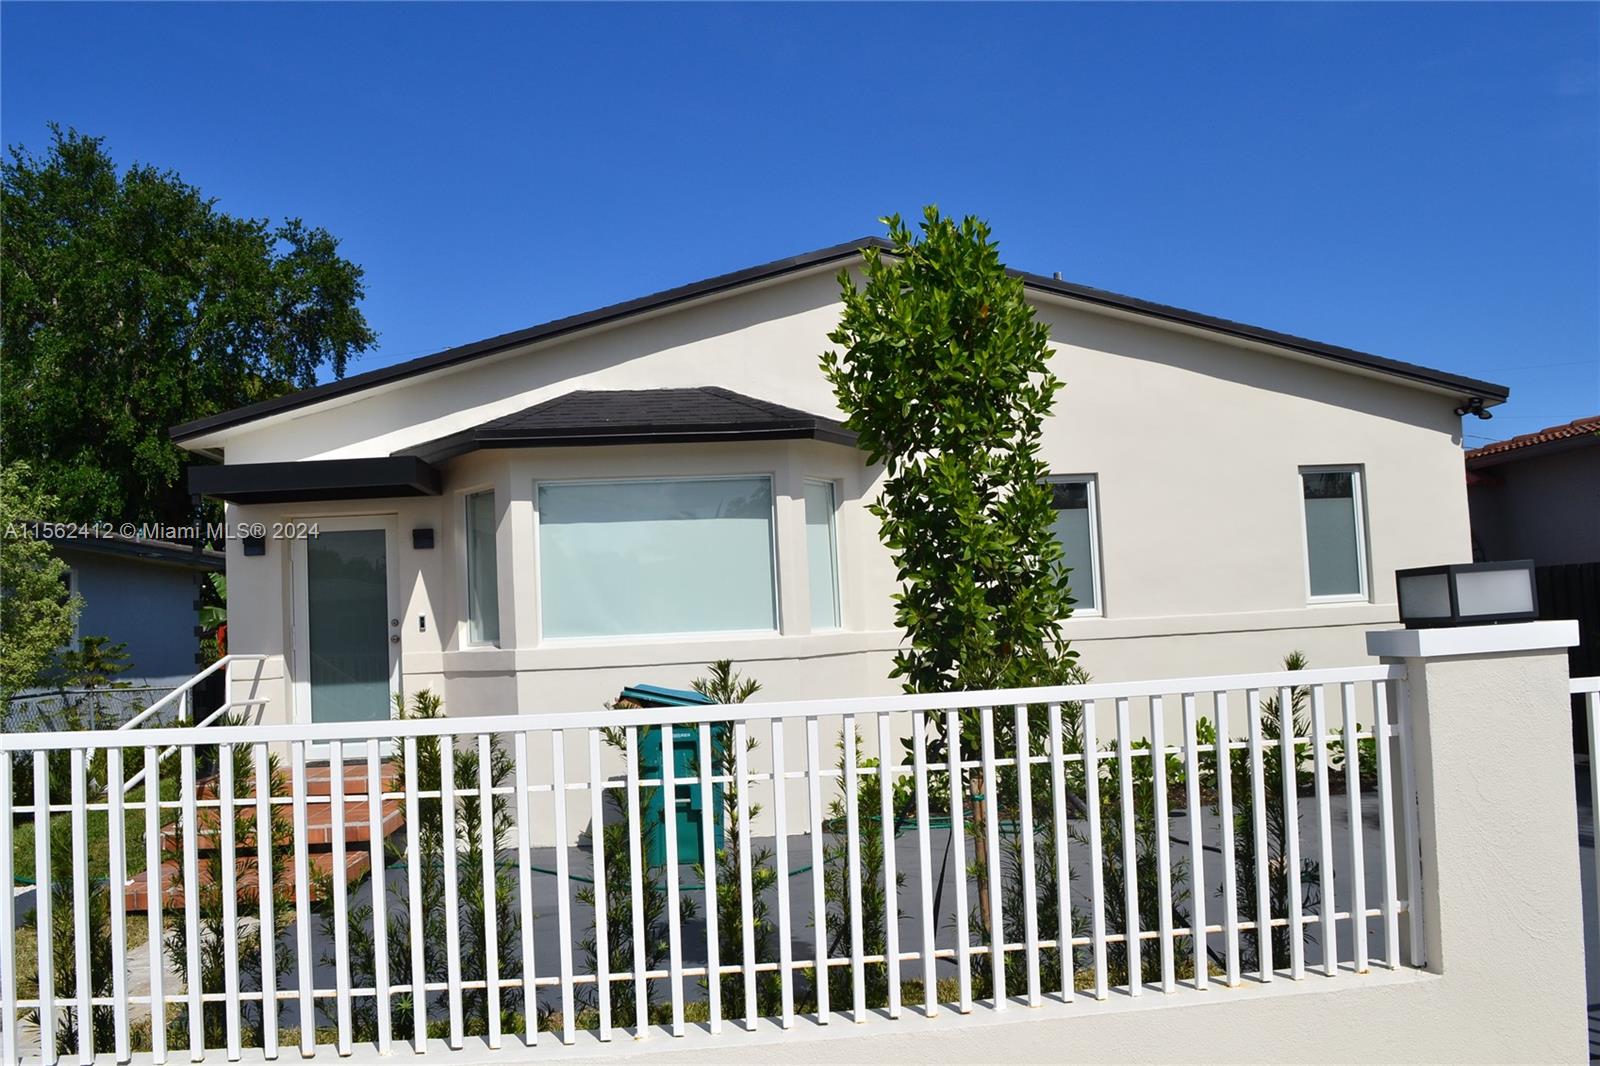 a front view of a house with white fence